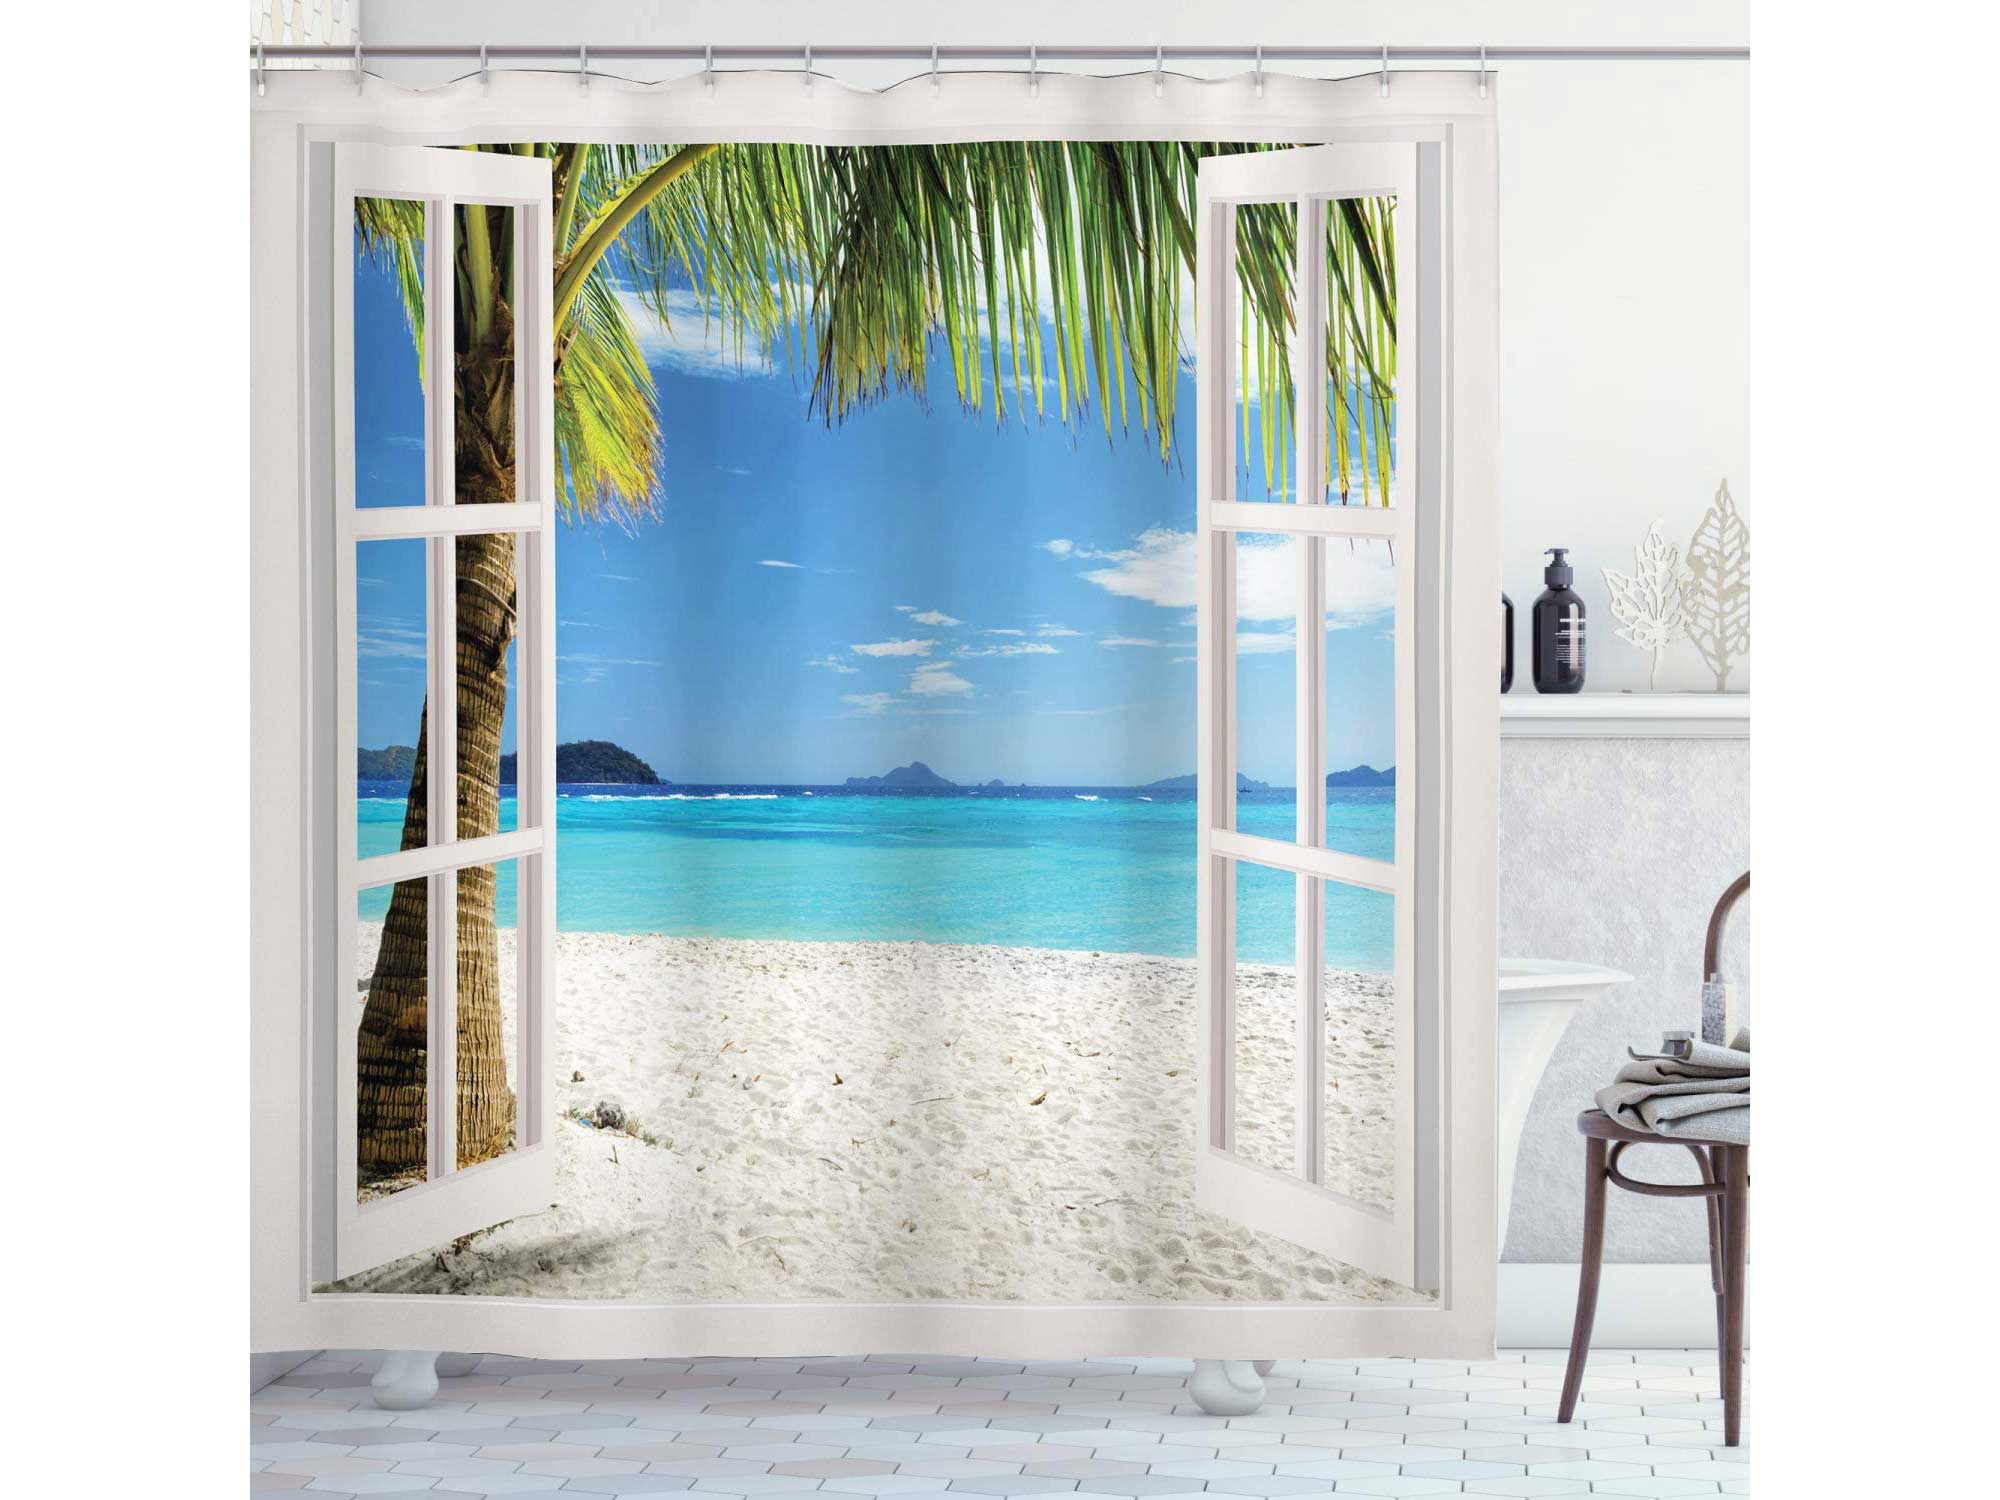 Ambesonne Turquoise Shower Curtain, Tropical Palm Trees on Island Ocean Beach Through White Wooden Windows, Cloth Fabric Bathroom Decor Set with Hooks, 70